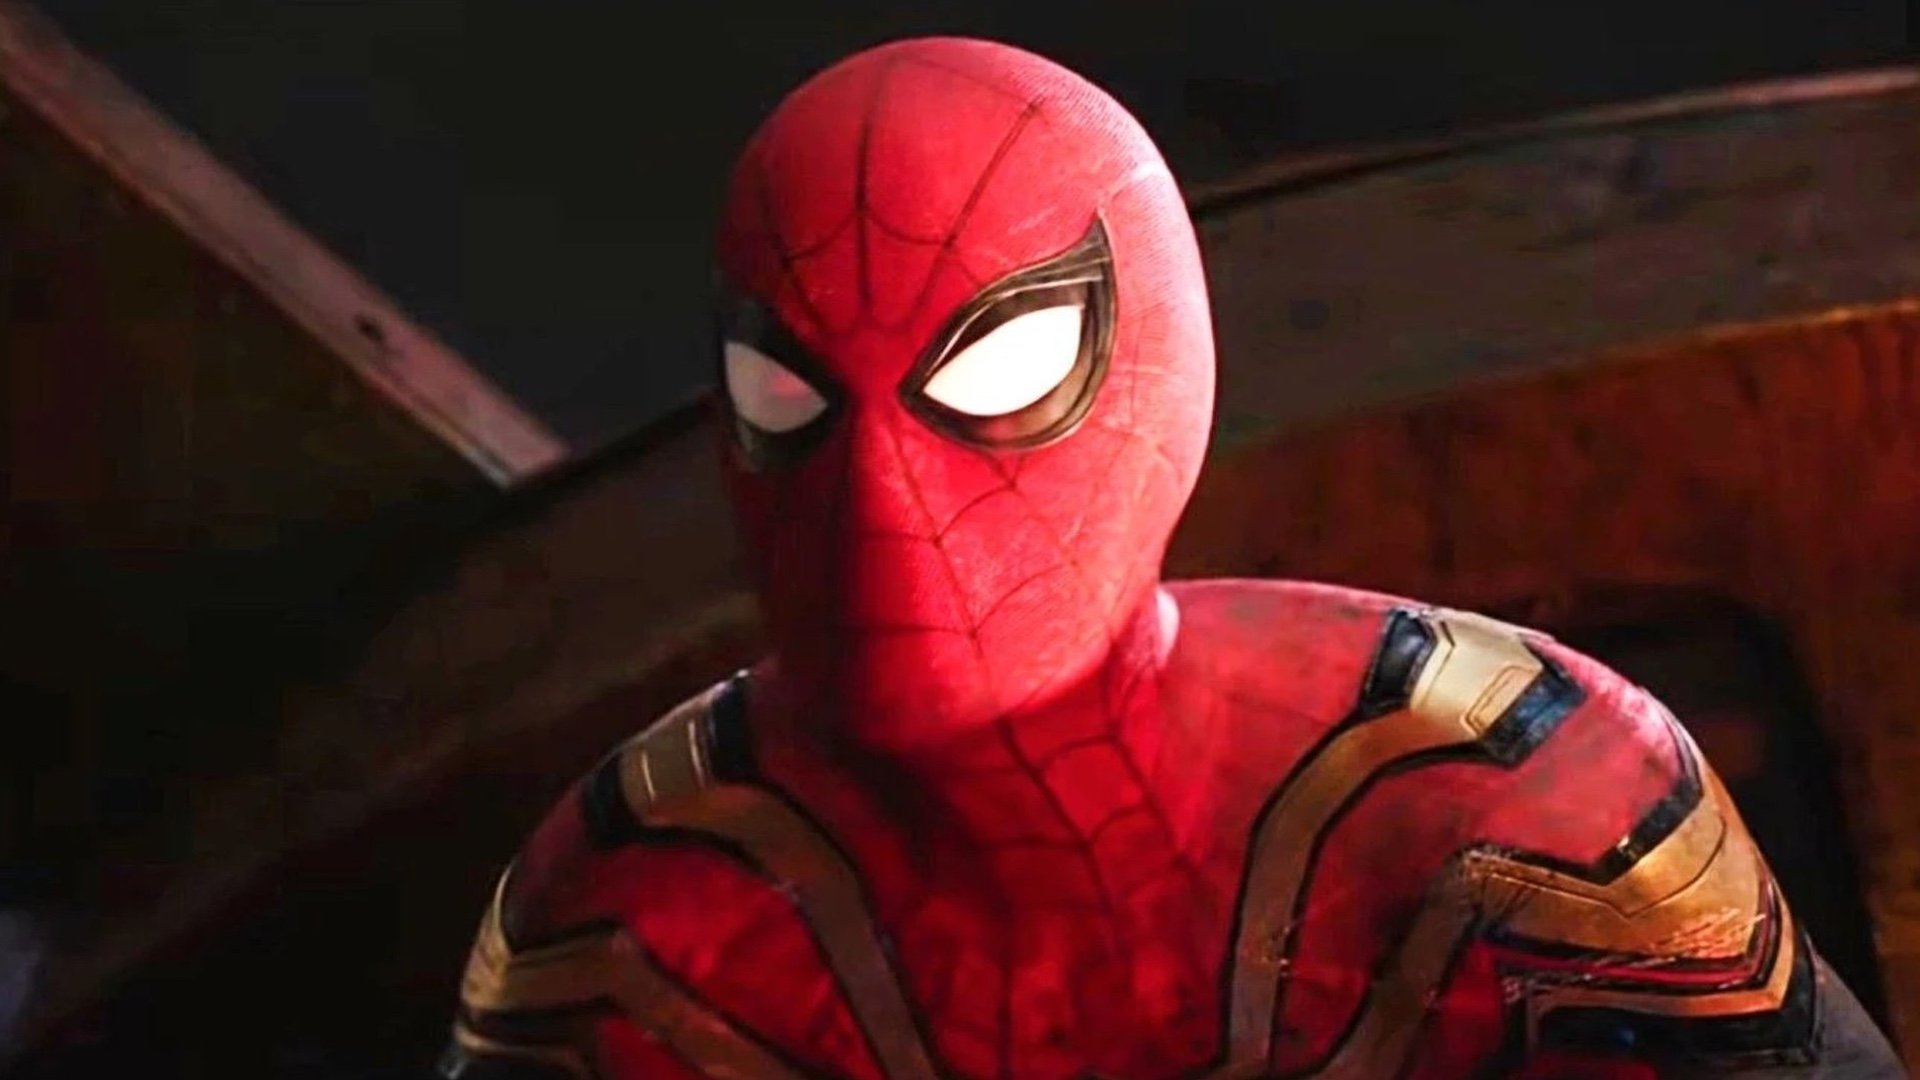 Spider-Man 4 Rumors Include Daredevil and Ant-Man